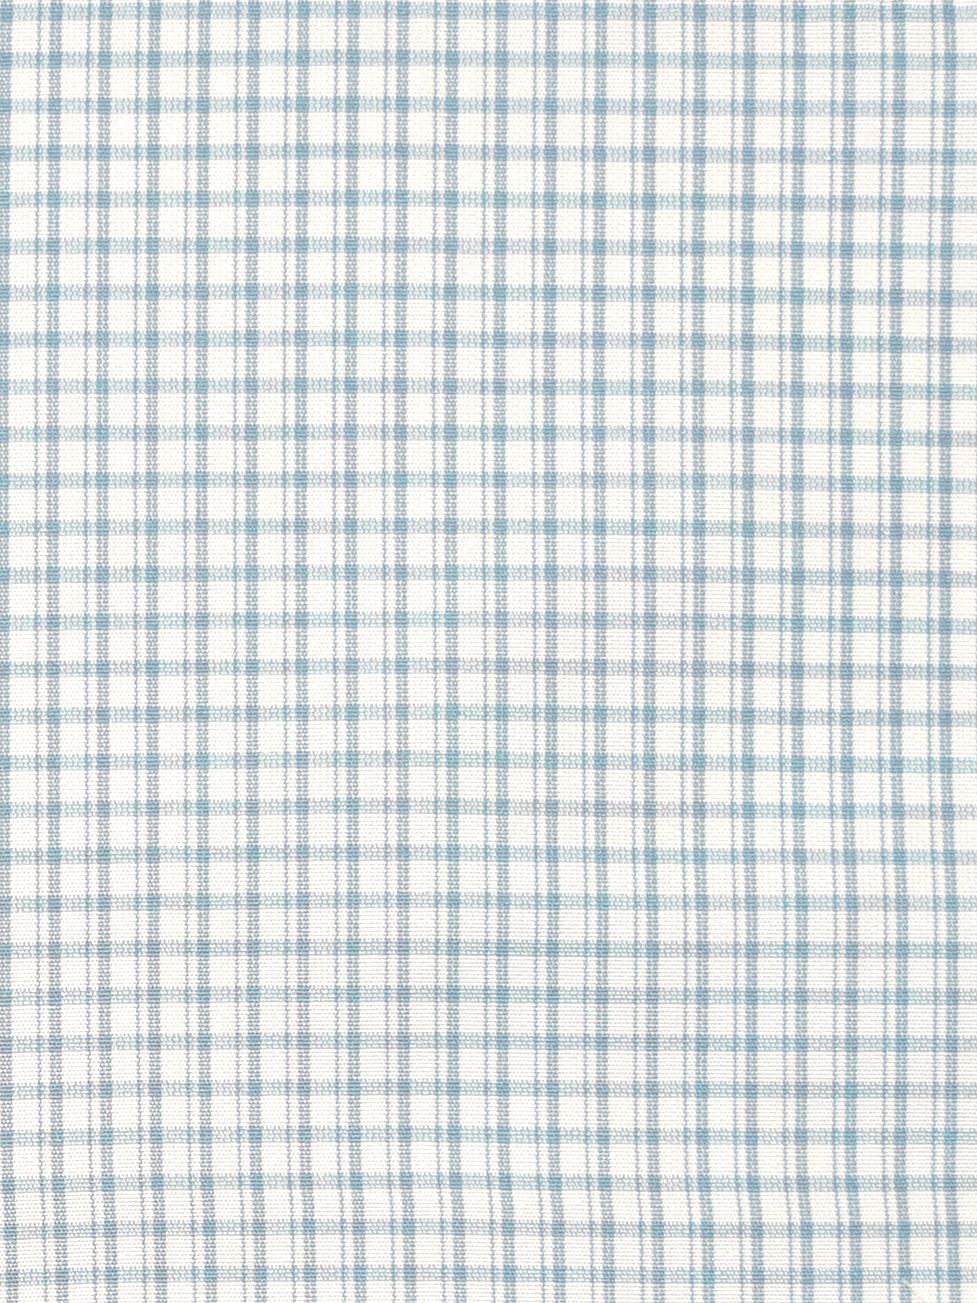 Astor Check fabric in sky color - pattern number SC 000126983 - by Scalamandre in the Scalamandre Fabrics Book 1 collection